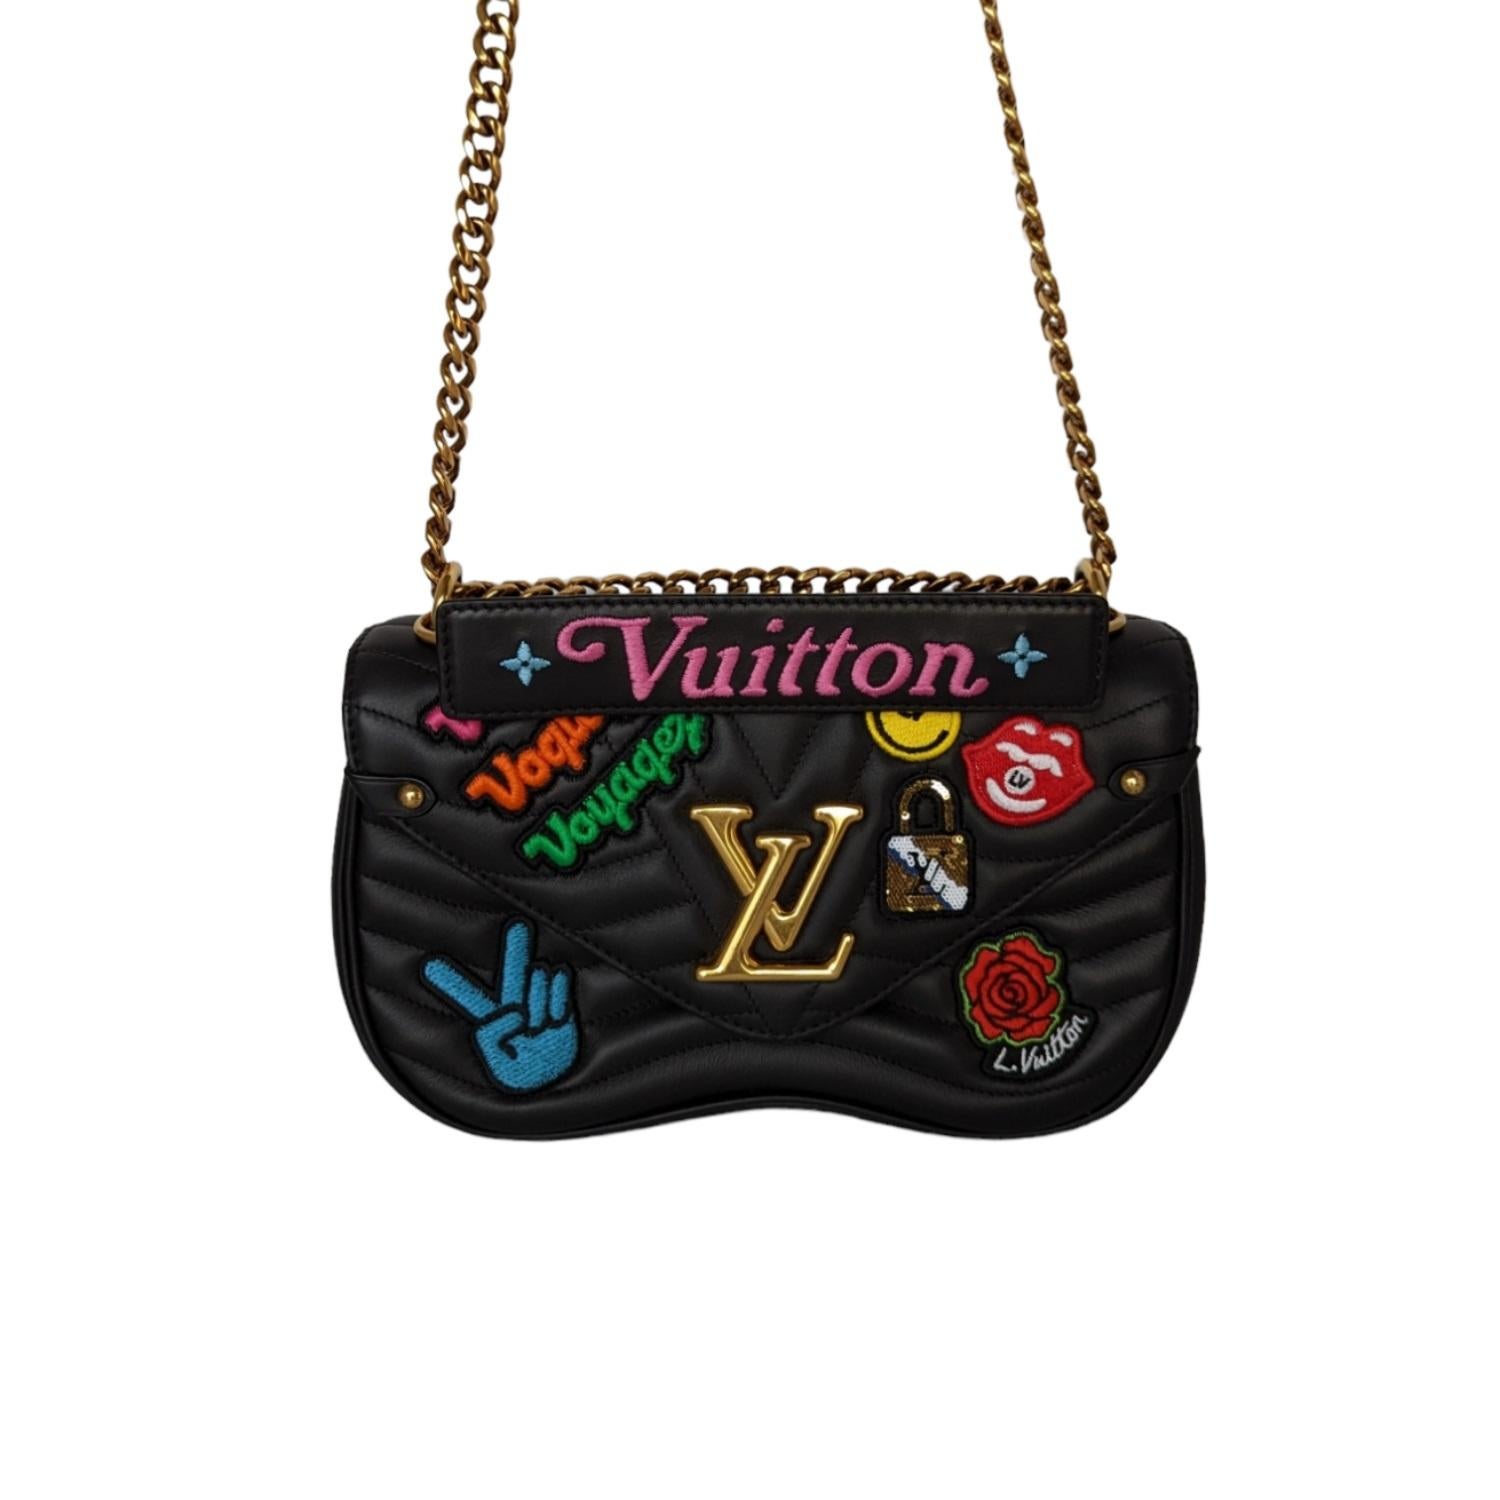 This chic handbag is crafted of smooth calfskin leather in black. The bag features a detachable handle signed “Louis Vuitton,” edgy hardware with an aged gold finish, colorful patches and a sliding chain adjusts the drop for long/short for shoulder